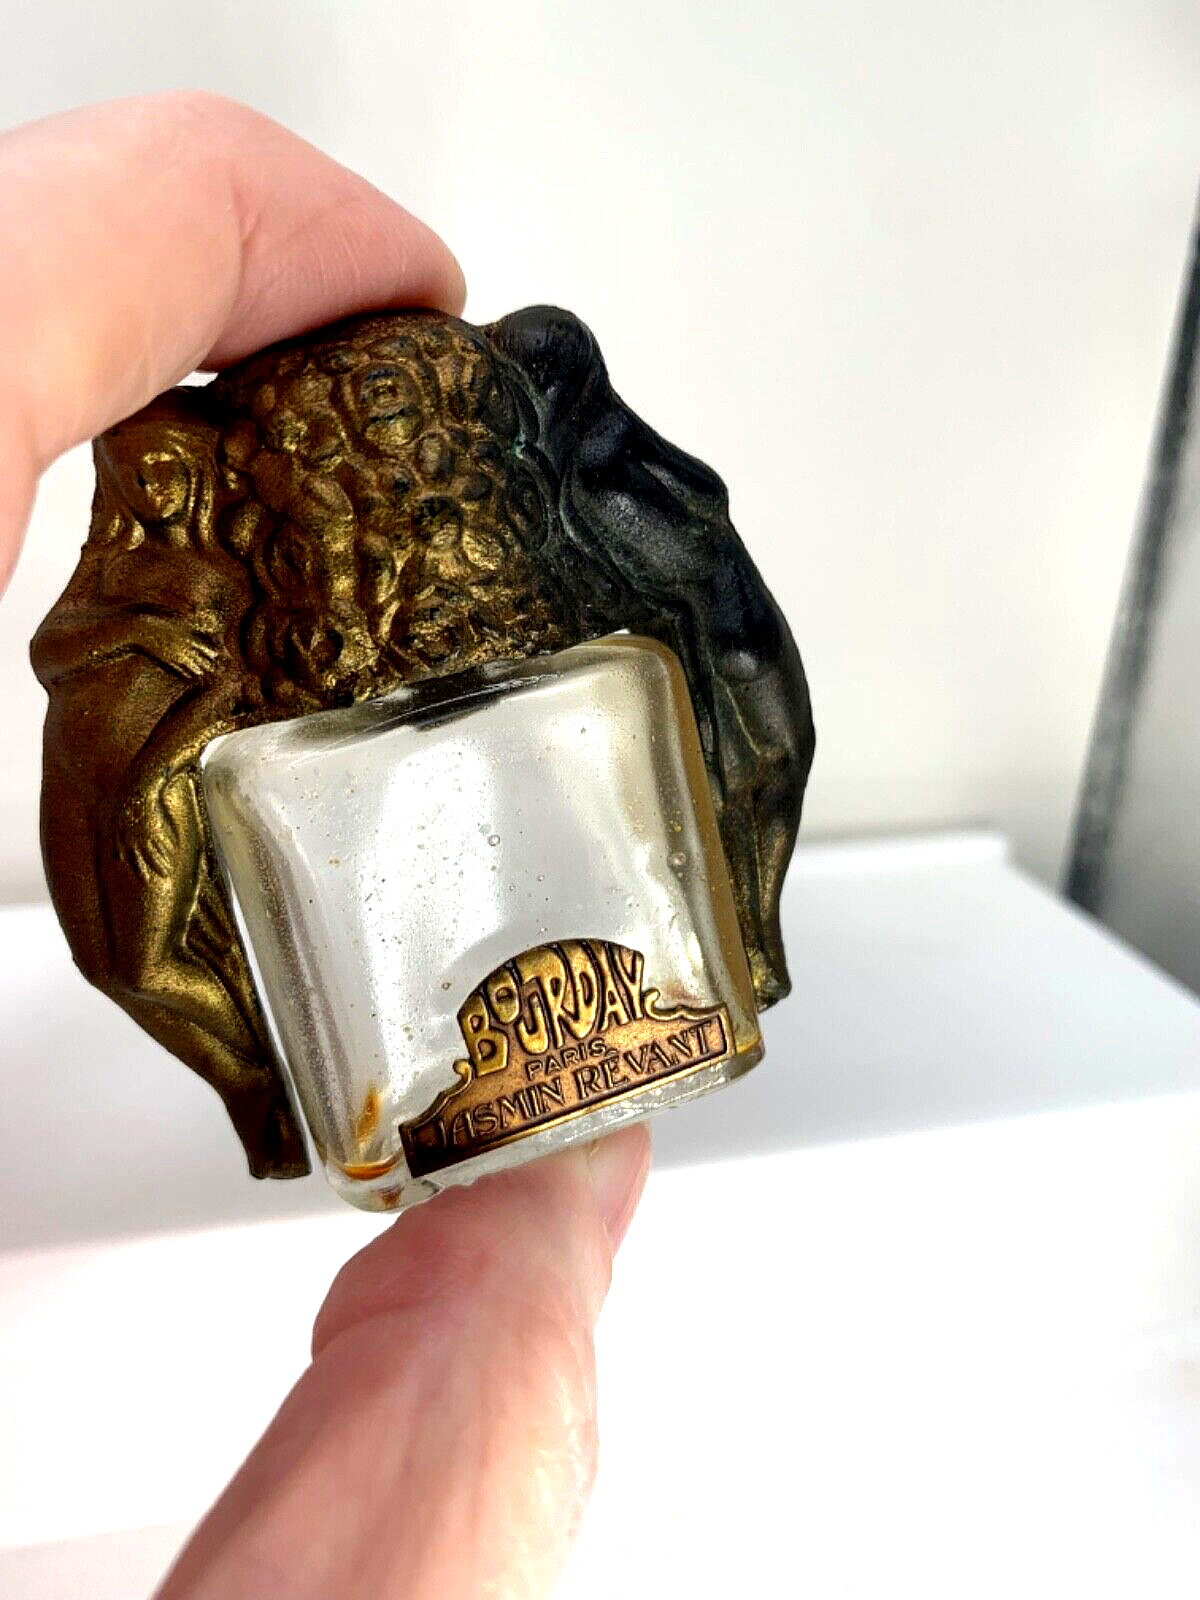 Very Rare  Lalique perfume bottle   Jasmin Revant by Bourday.  Vintage.  1925.